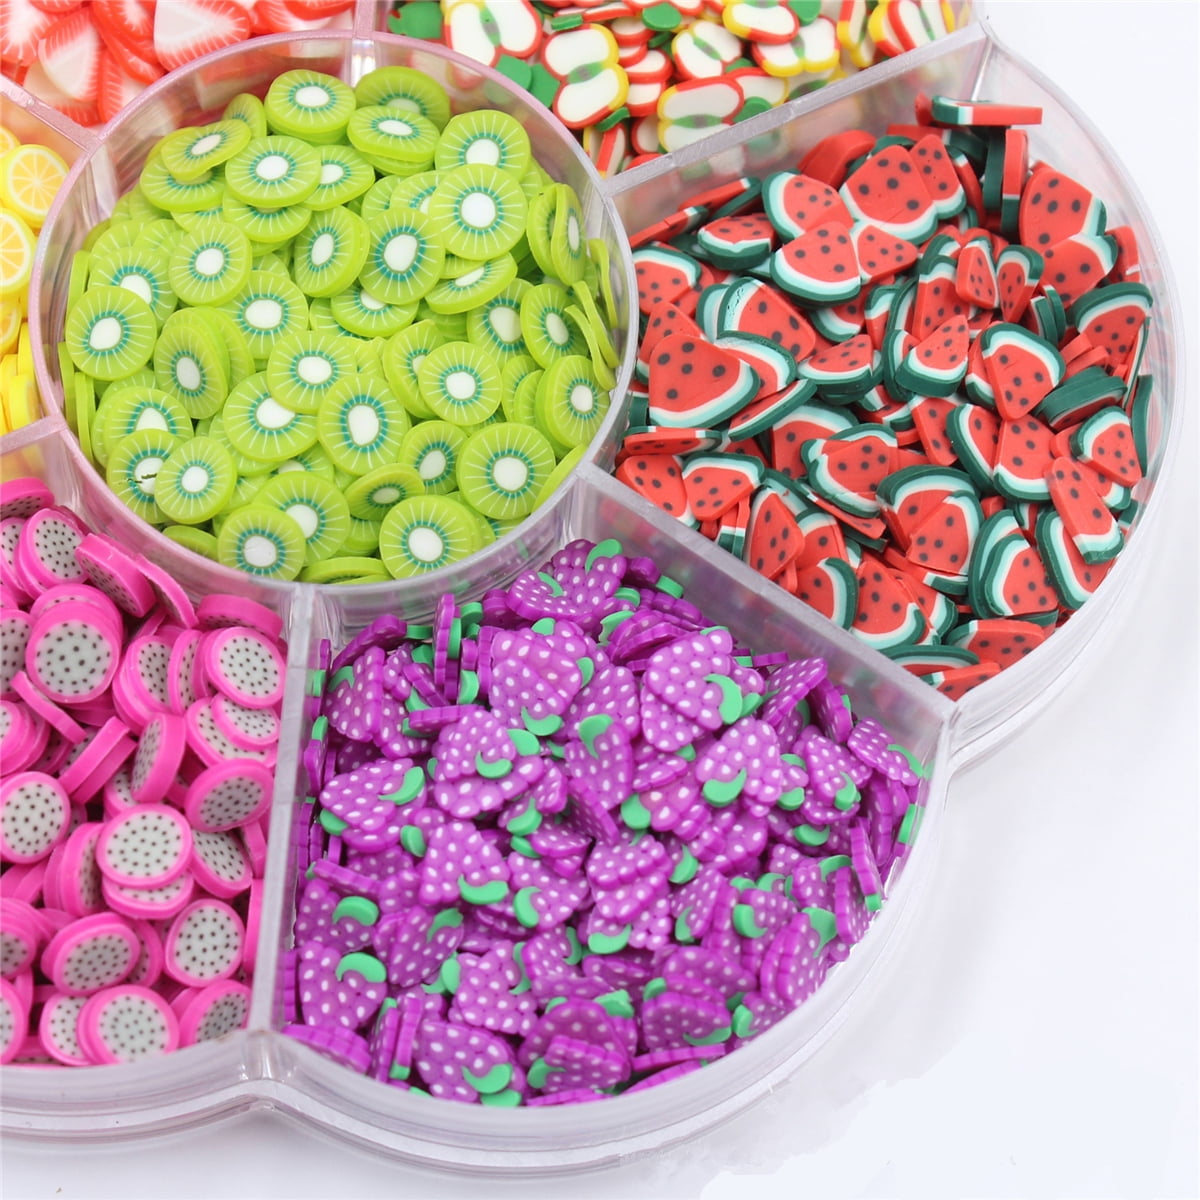  TCOTBE 2000 Pcs Fruit Polymer Slices,Fruit Slime Supplies  Charms Slime Acessories Slime Add ins Polymer Clay DIY Nail Art,Charms Slime  Making Kit Decoration Arts Crafts : Arts, Crafts & Sewing